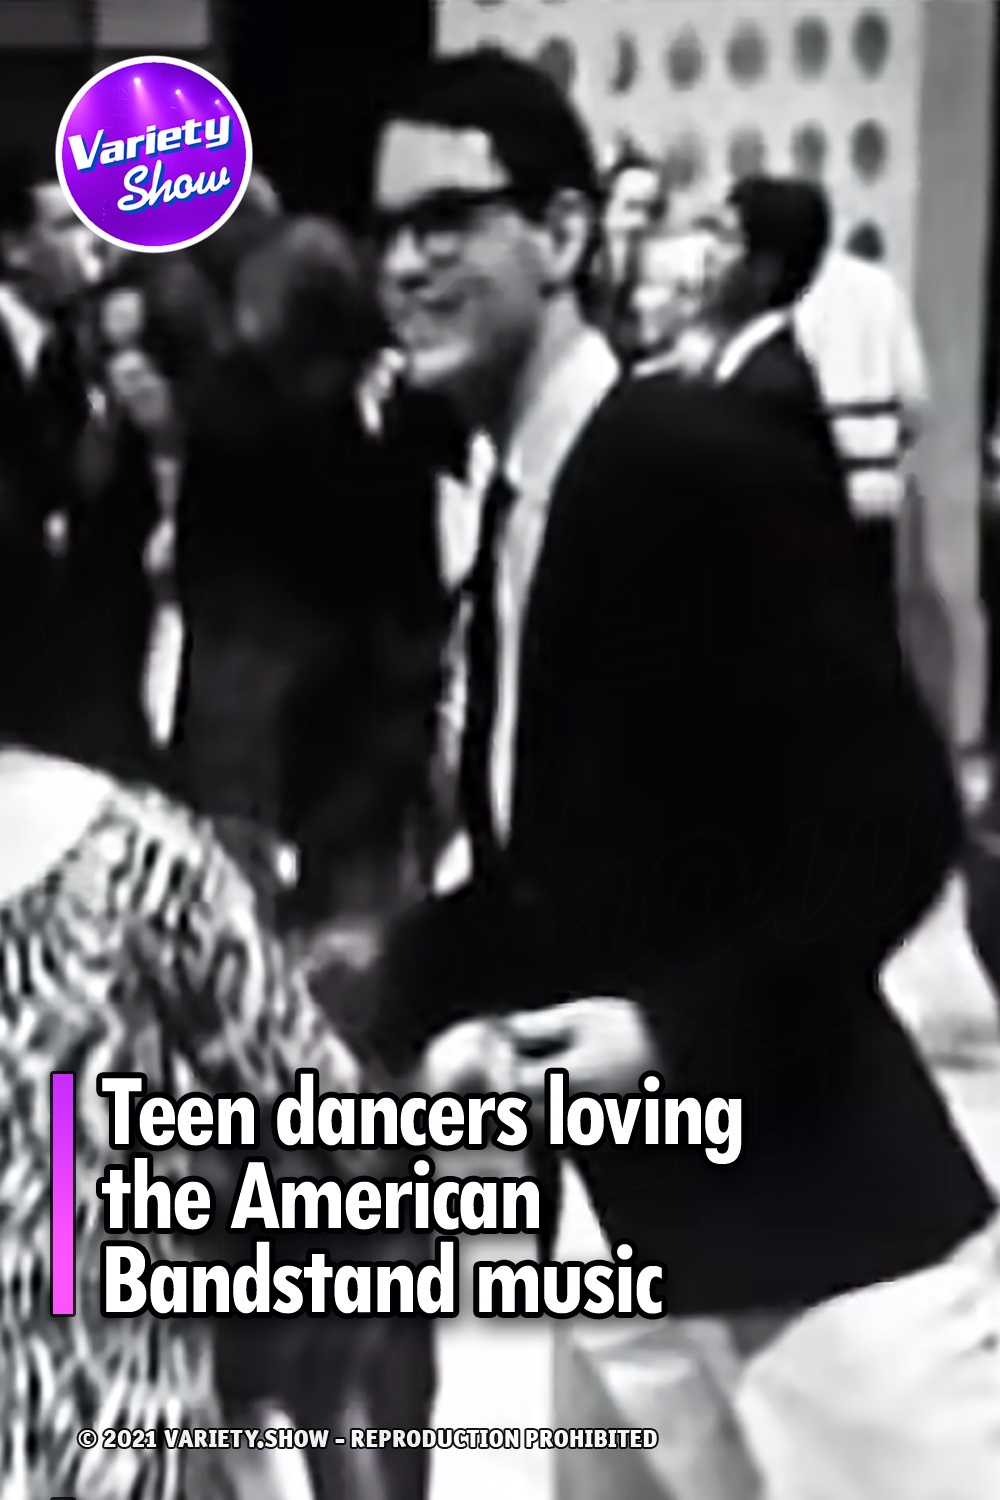 Teen dancers loving the American Bandstand music